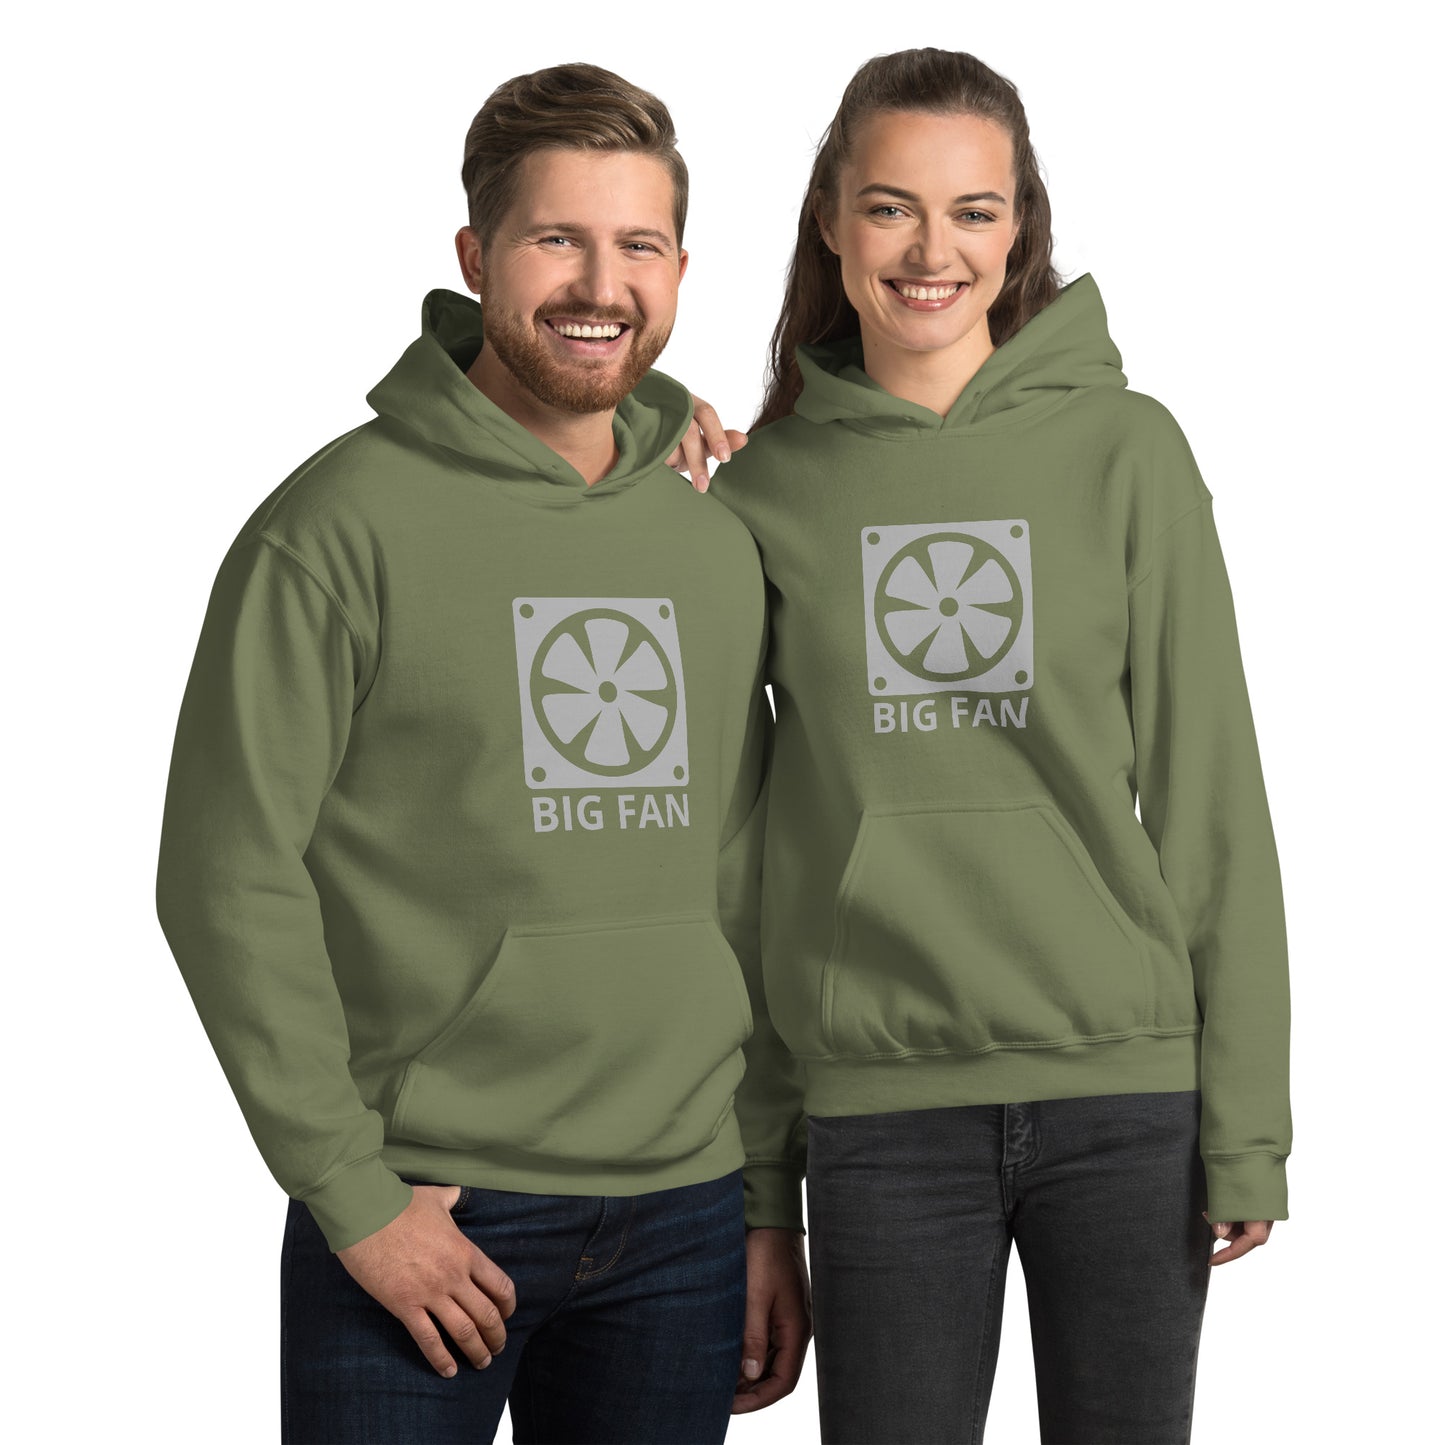 Man and women with military green hoodie with image of a big computer fan and the text "BIG FAN"